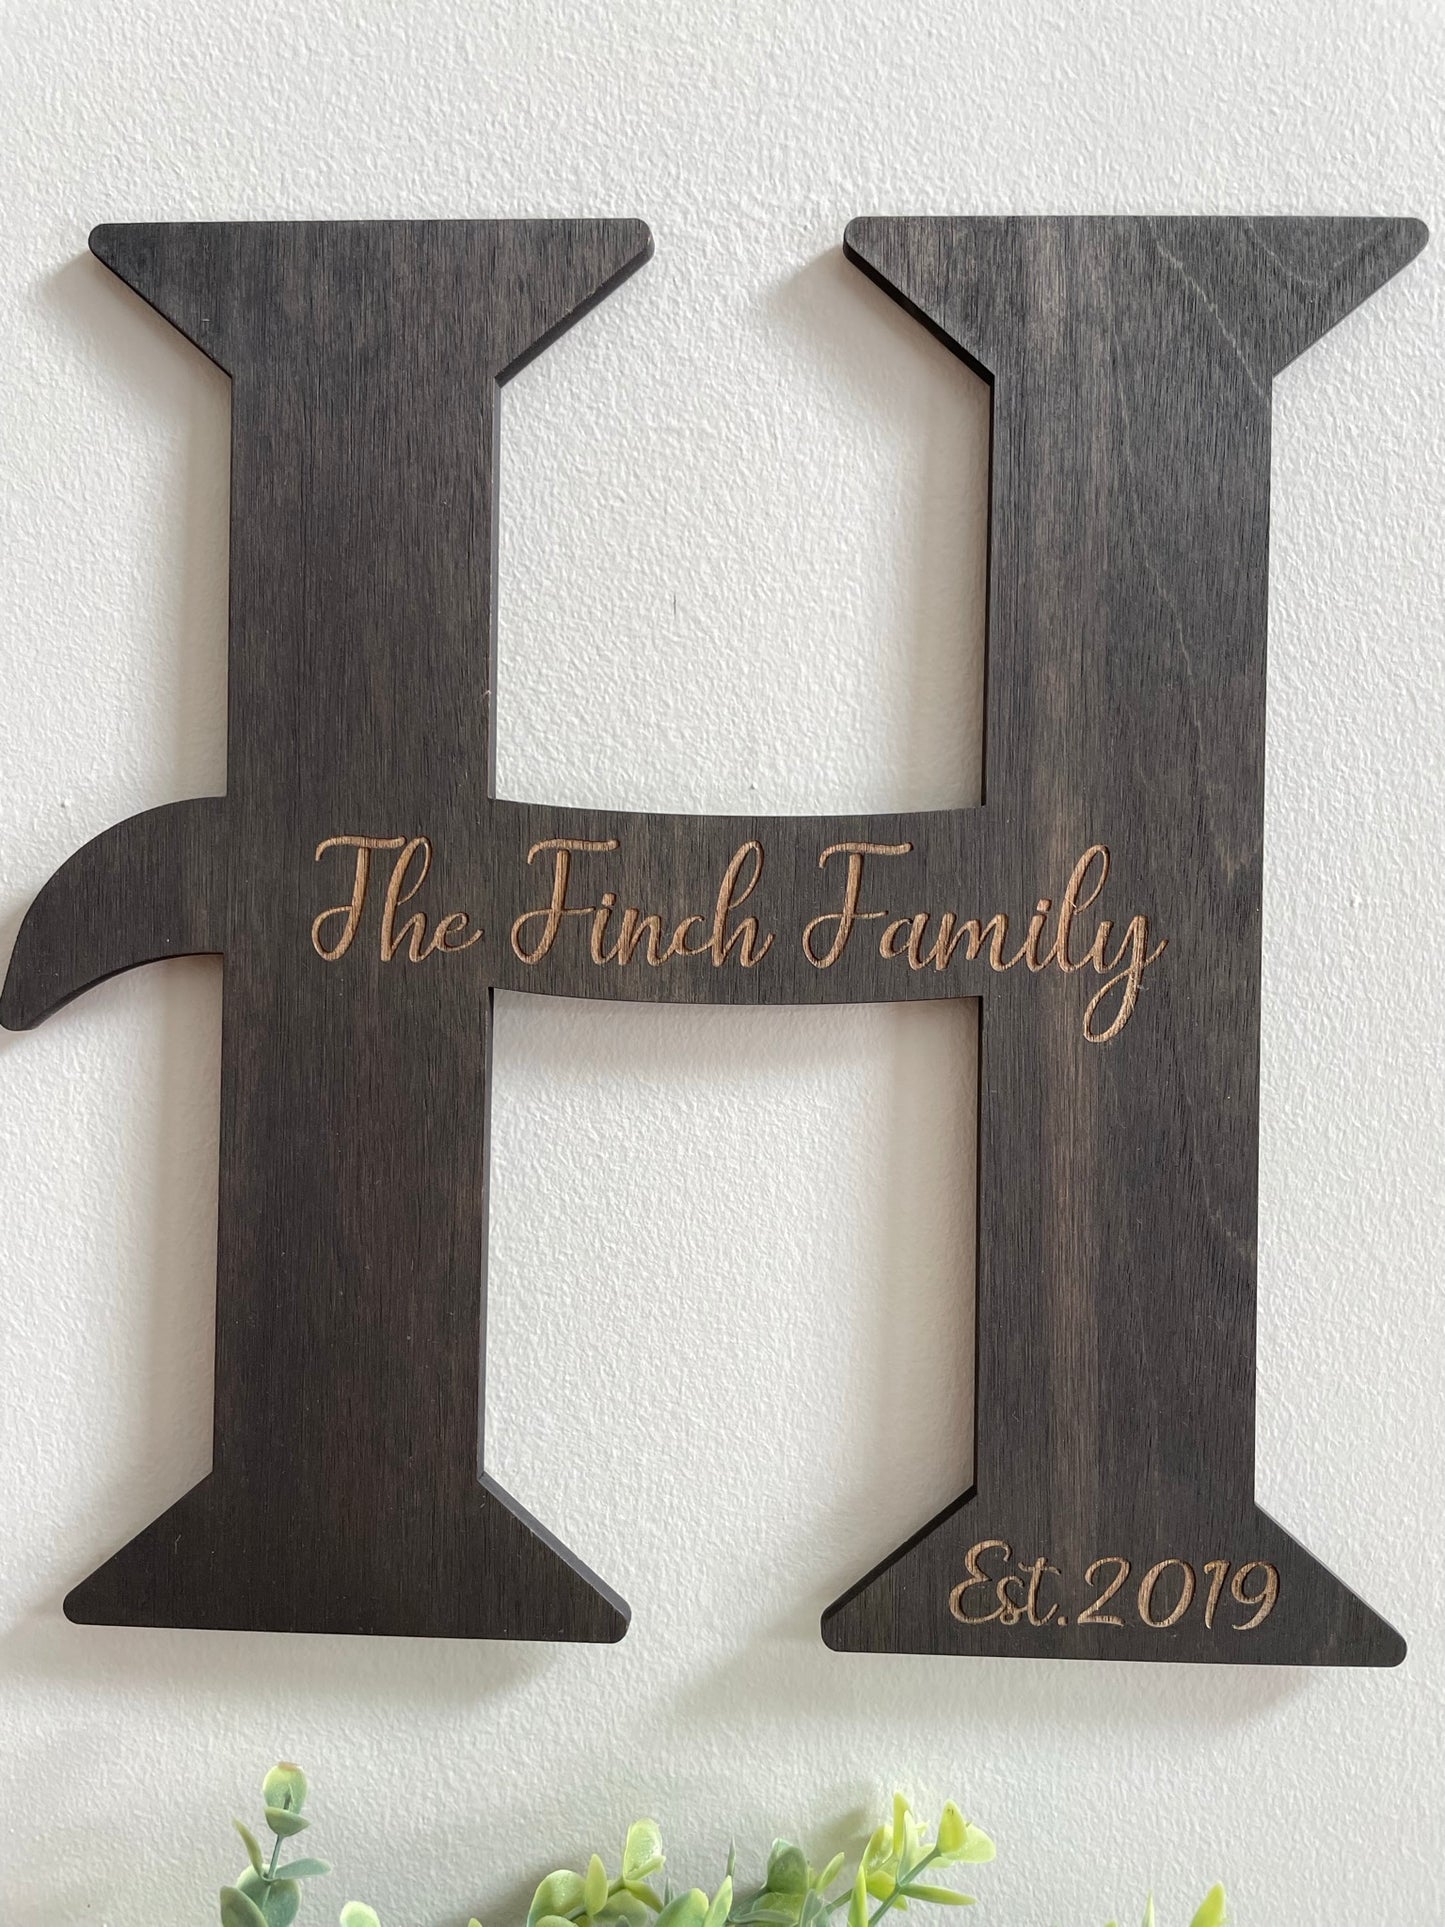 HOME - Laser Cut Wood Letters in Stained Black